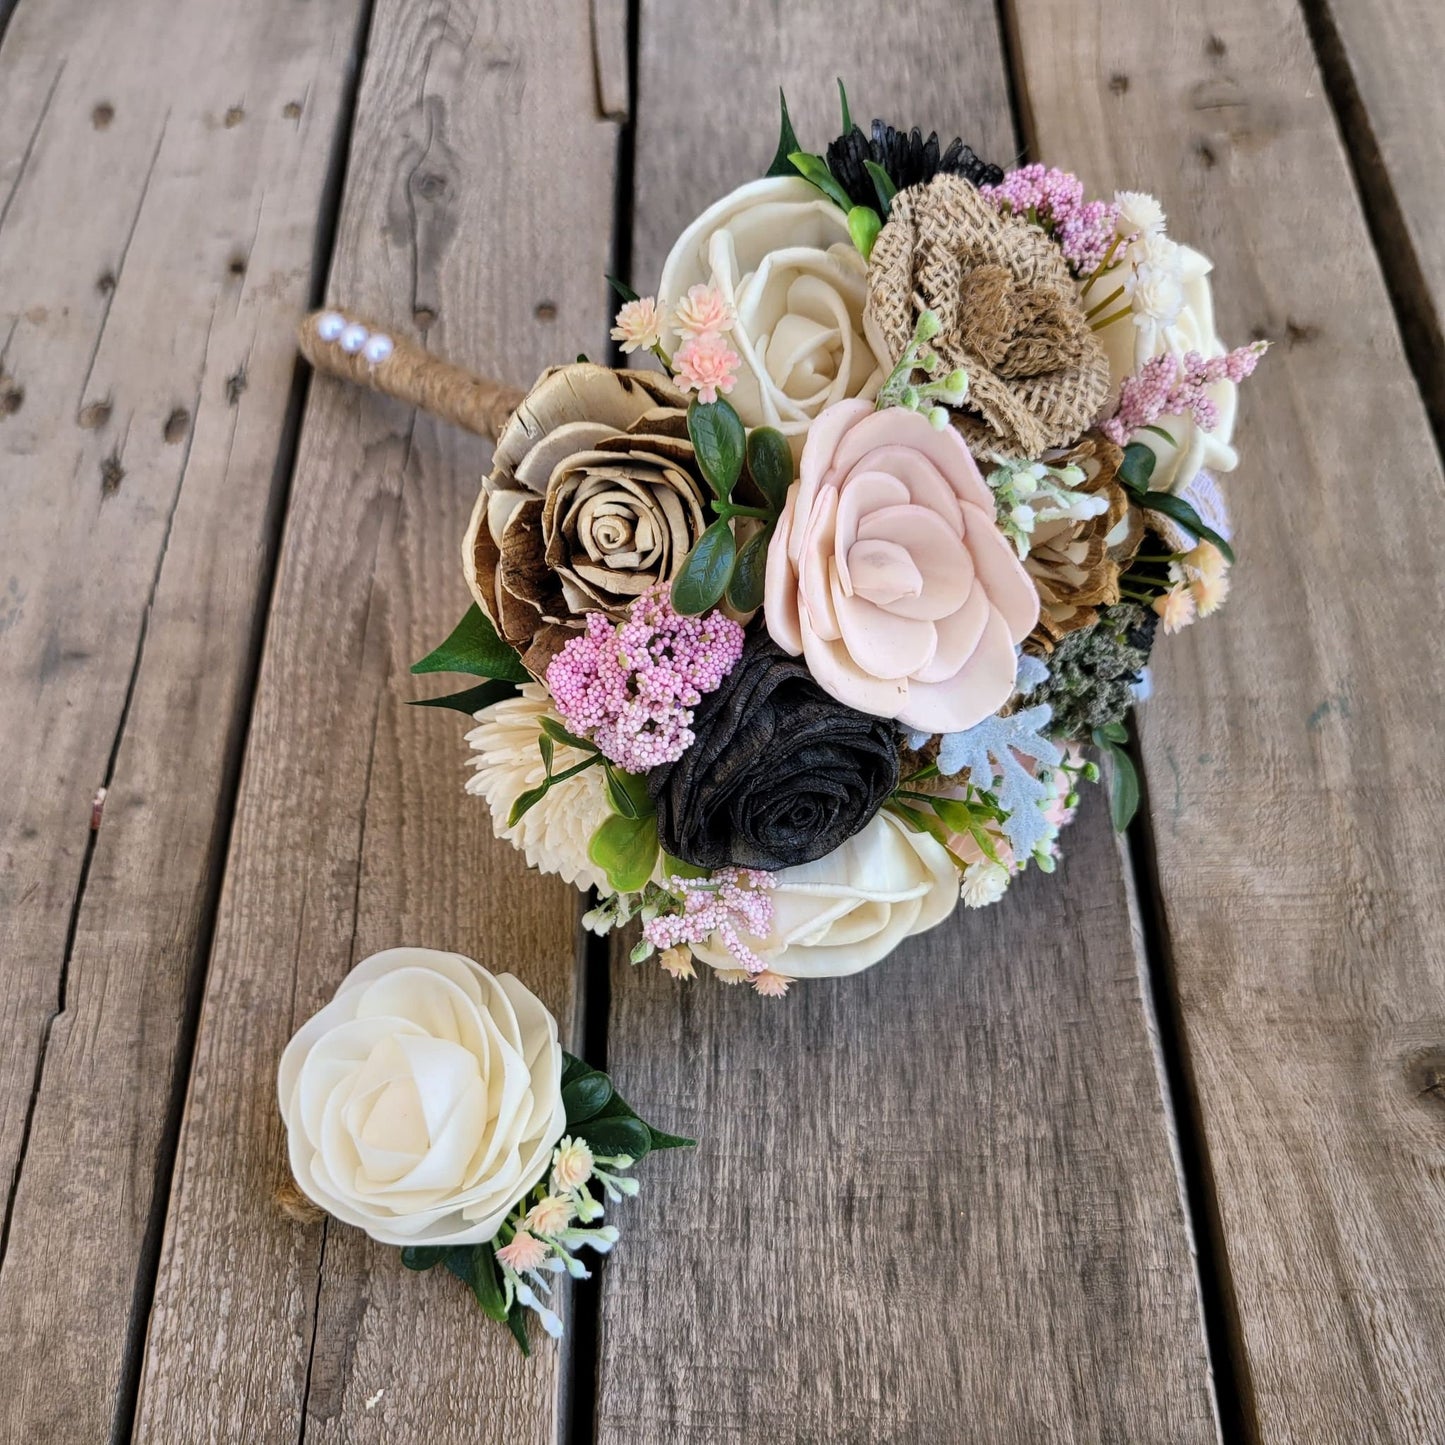 Rustic Black and Light Pink Wood Flower Bouquet, Sola Wood Flowers with Burlap Flowers, Bride or Bridesmaid Wedding Florals